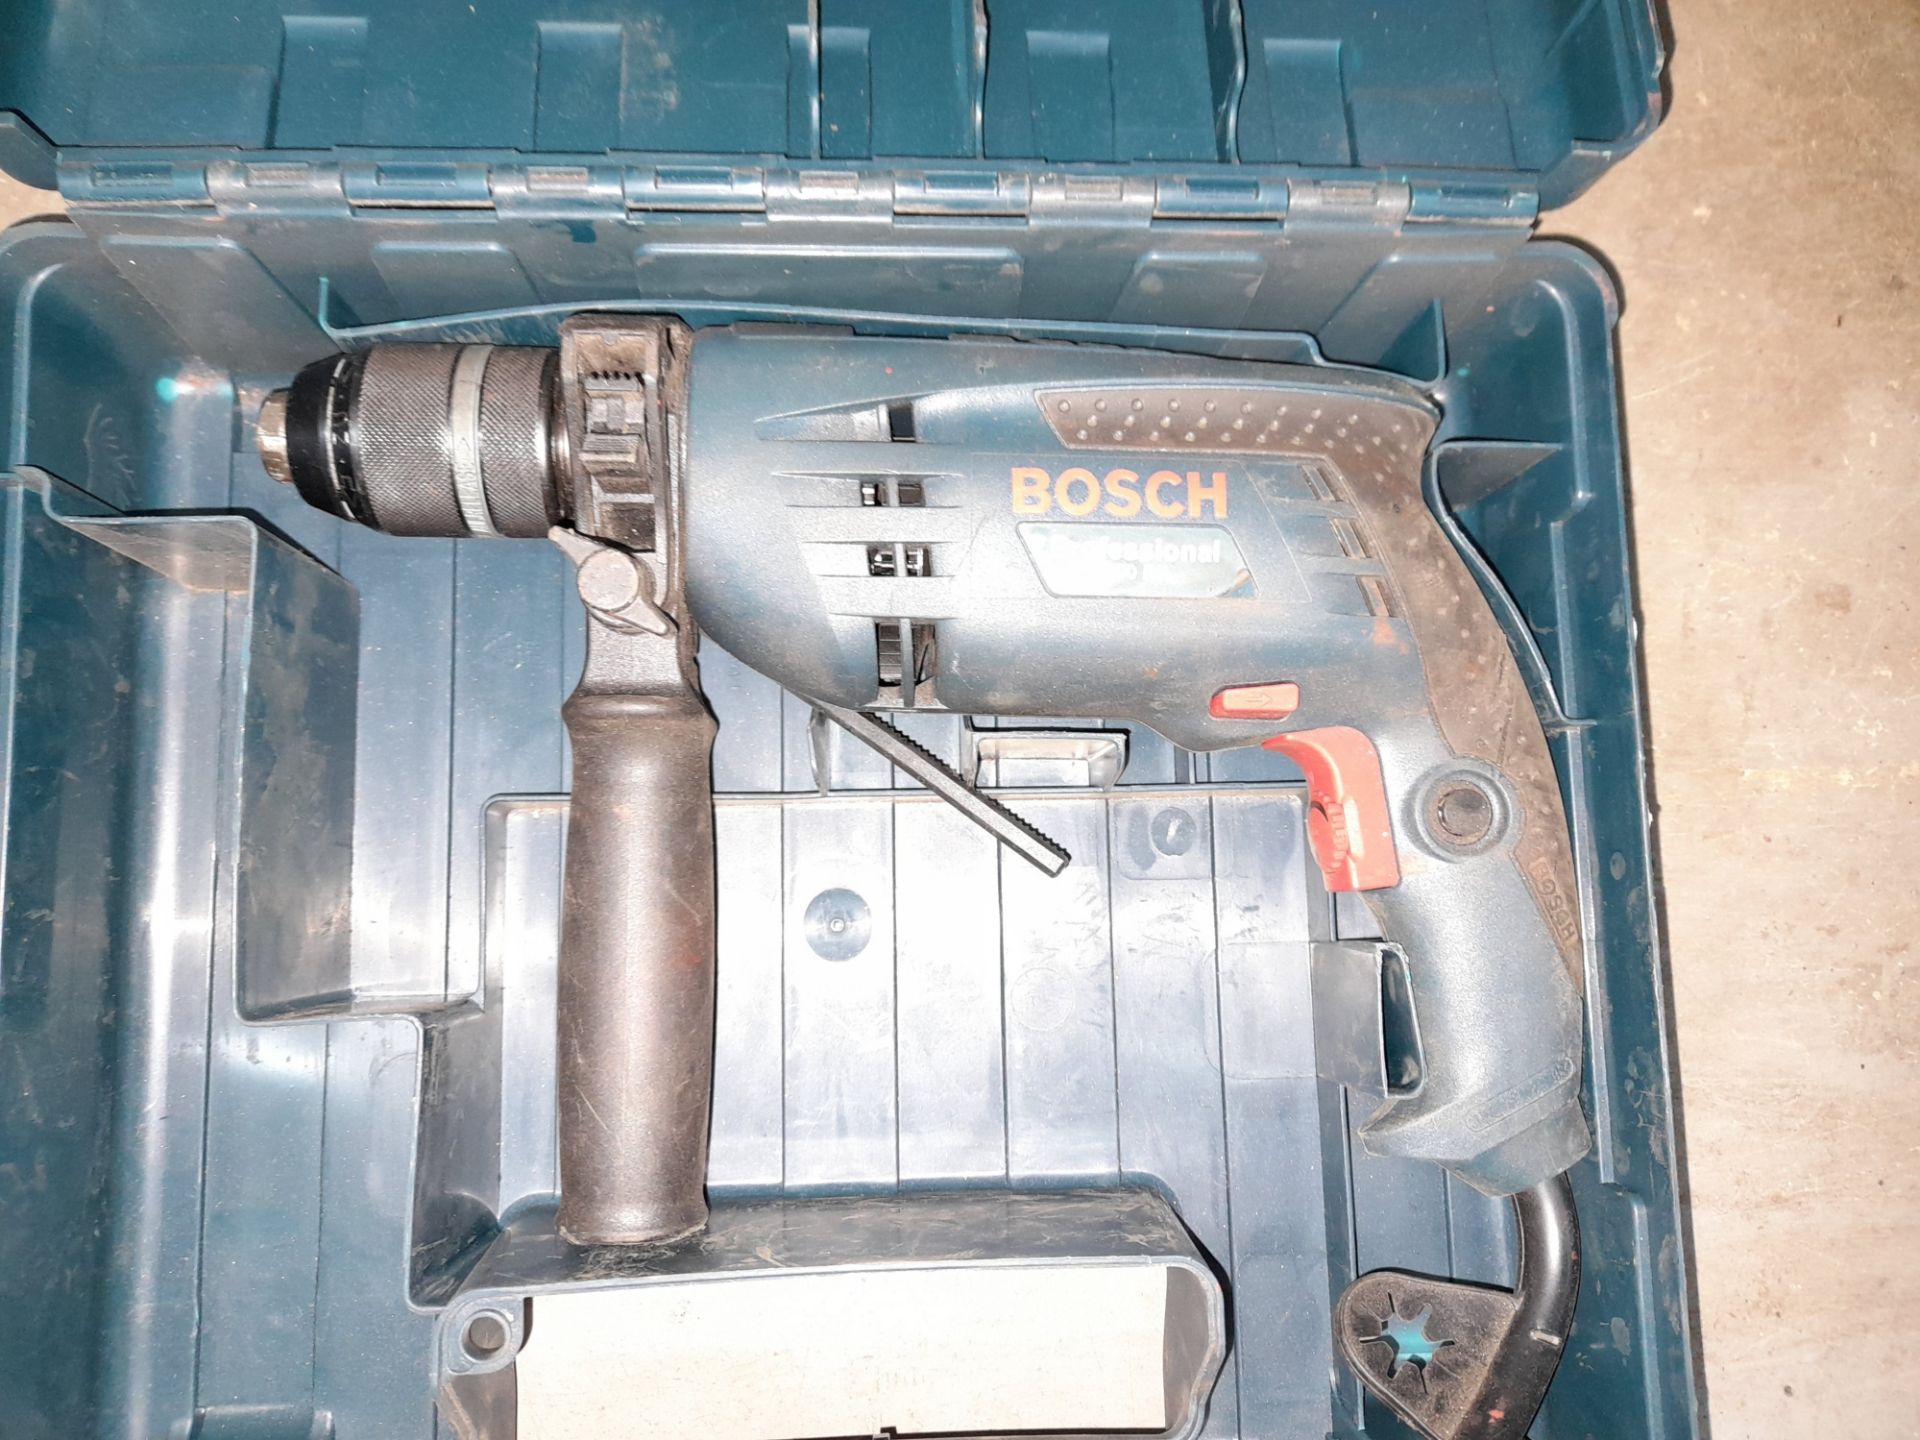 Bosch Professional GSB 160 RE impact drill, 110v - Image 2 of 2